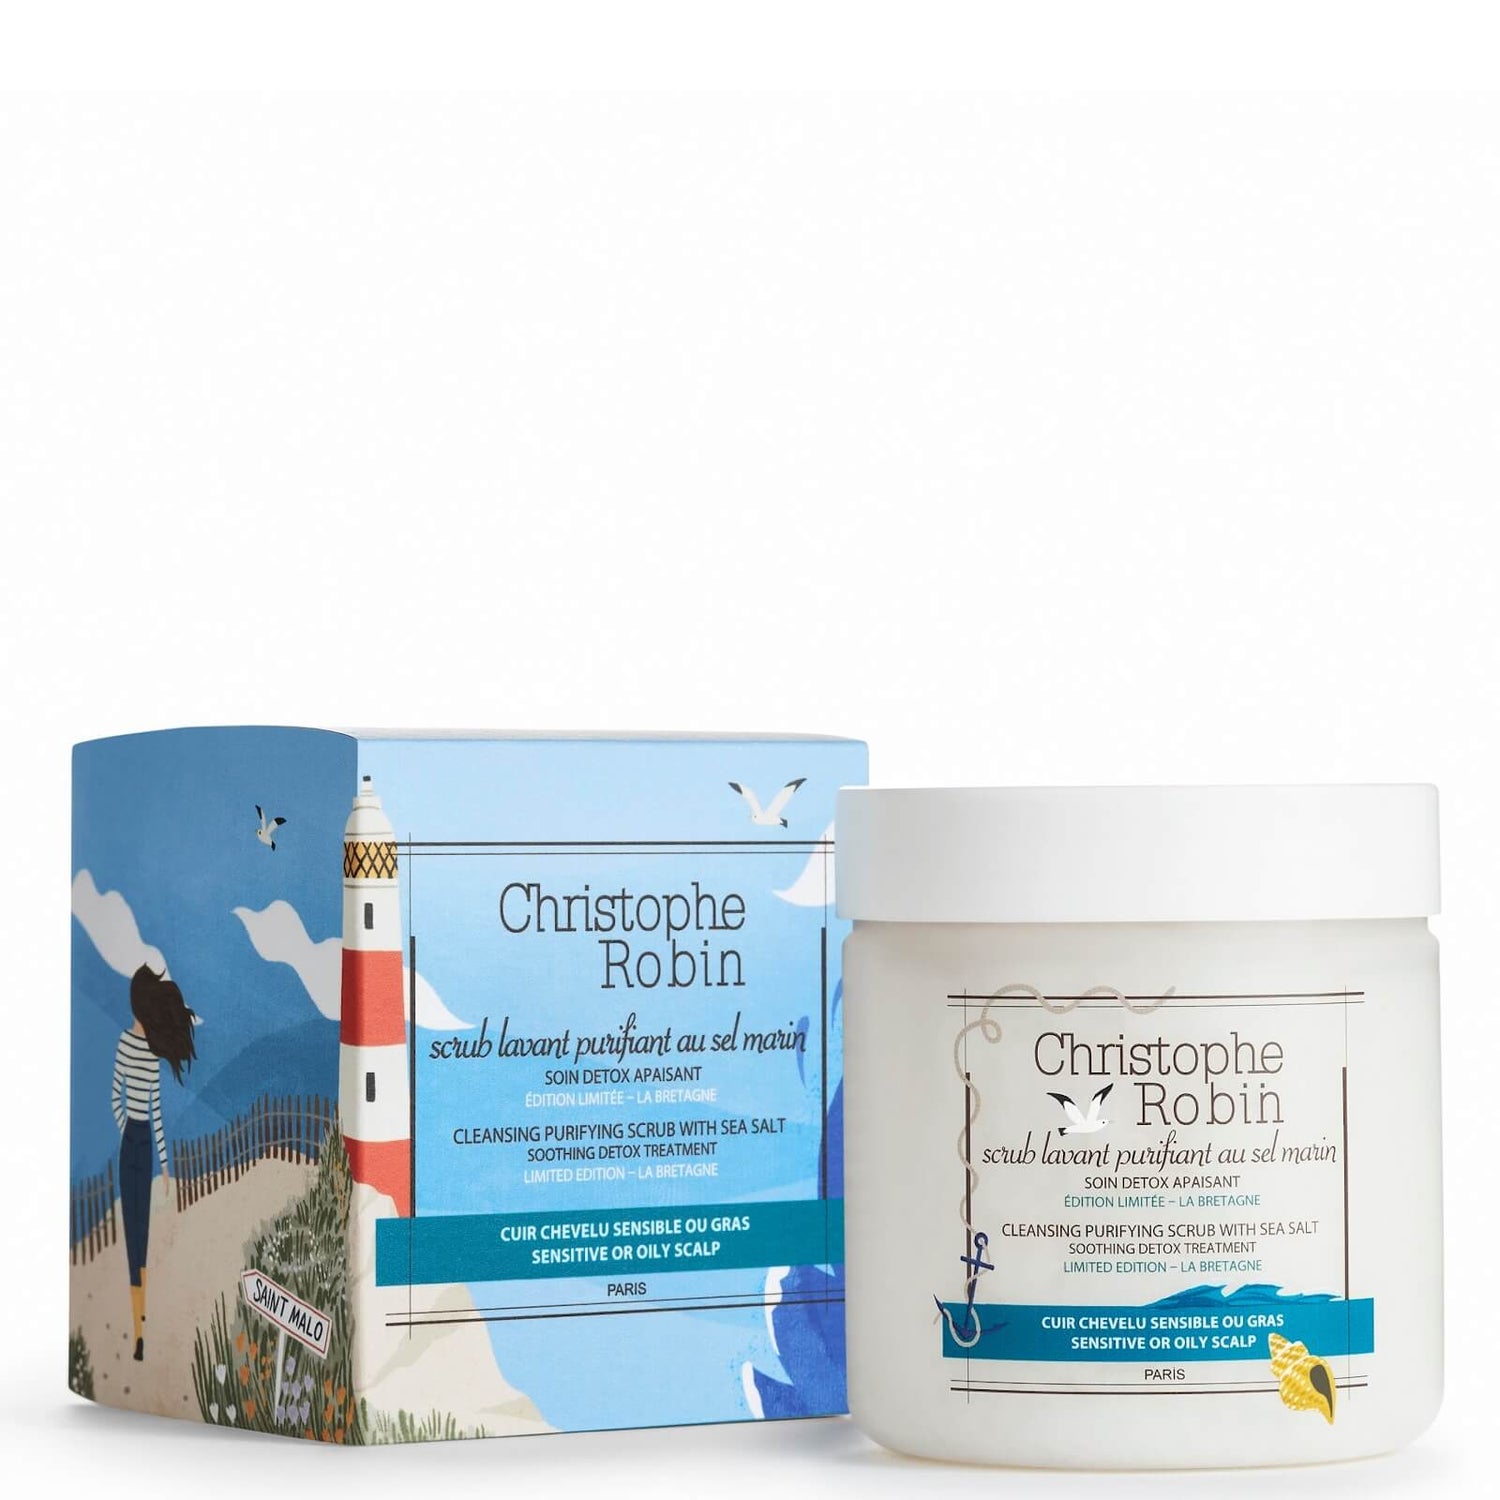 Christophe Robin New Limited Edition Cleansing Purifying Scrub with Sea Salt 250 ml